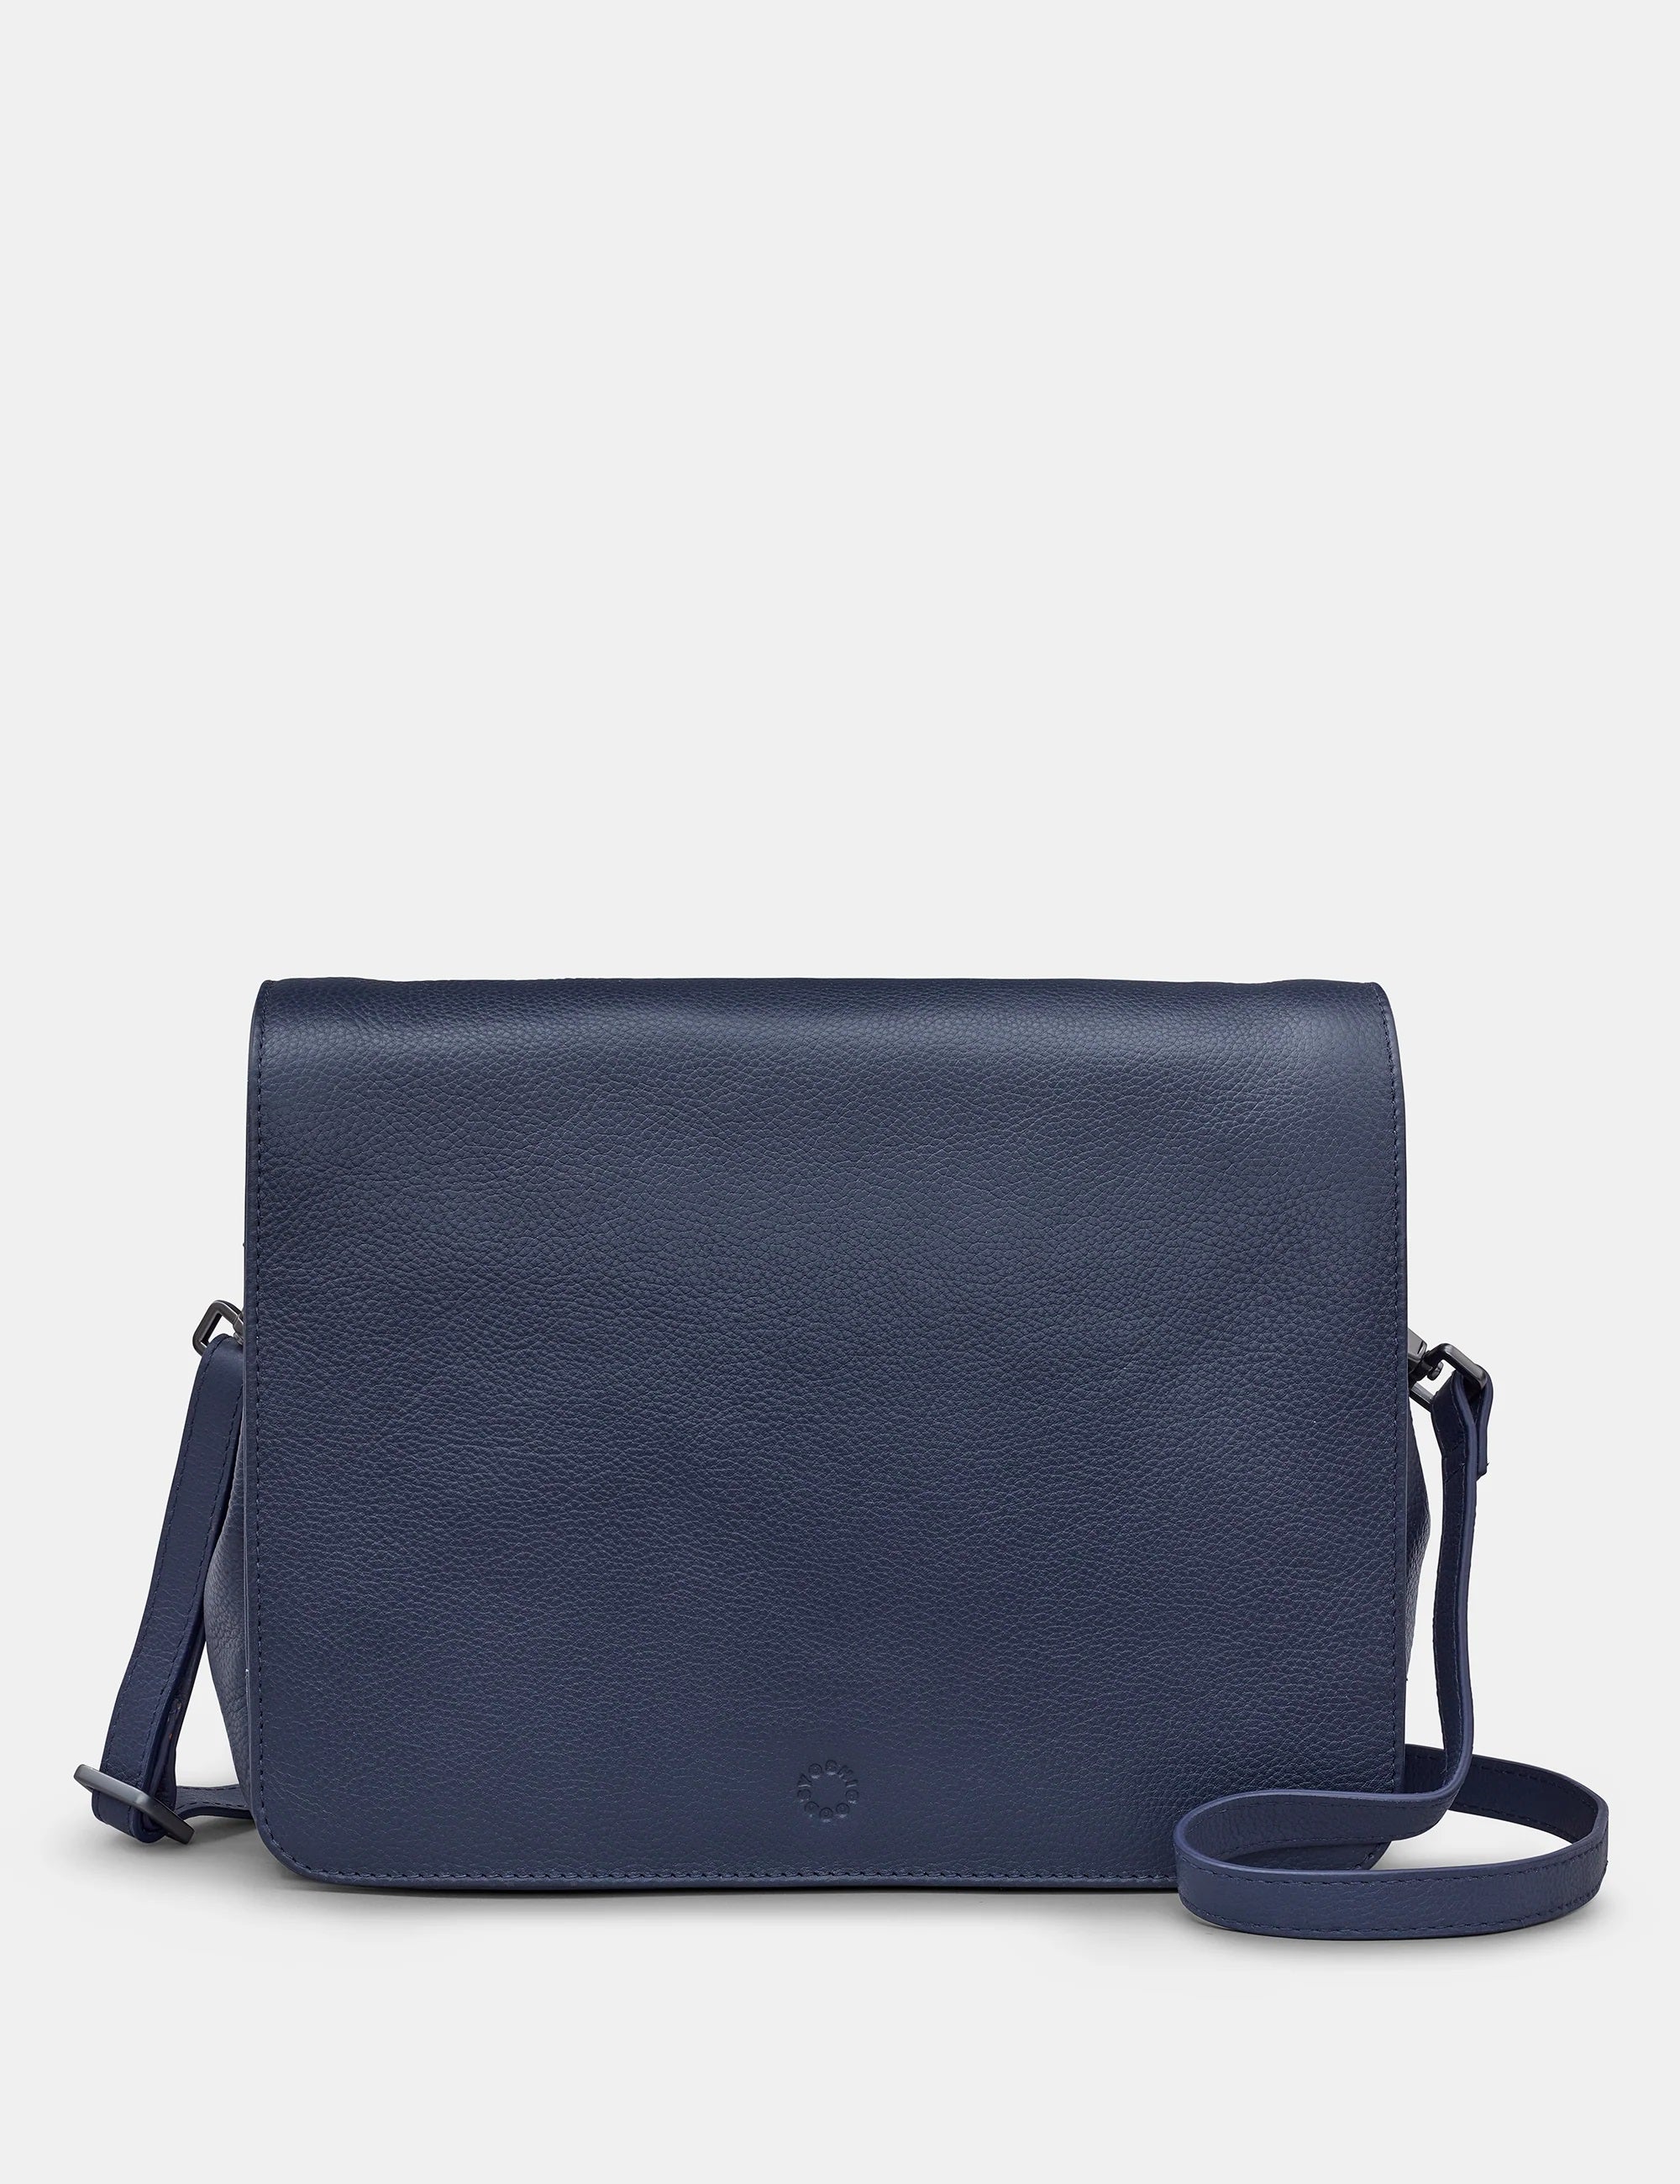 Bexley Leather Flap Over Bag - Navy